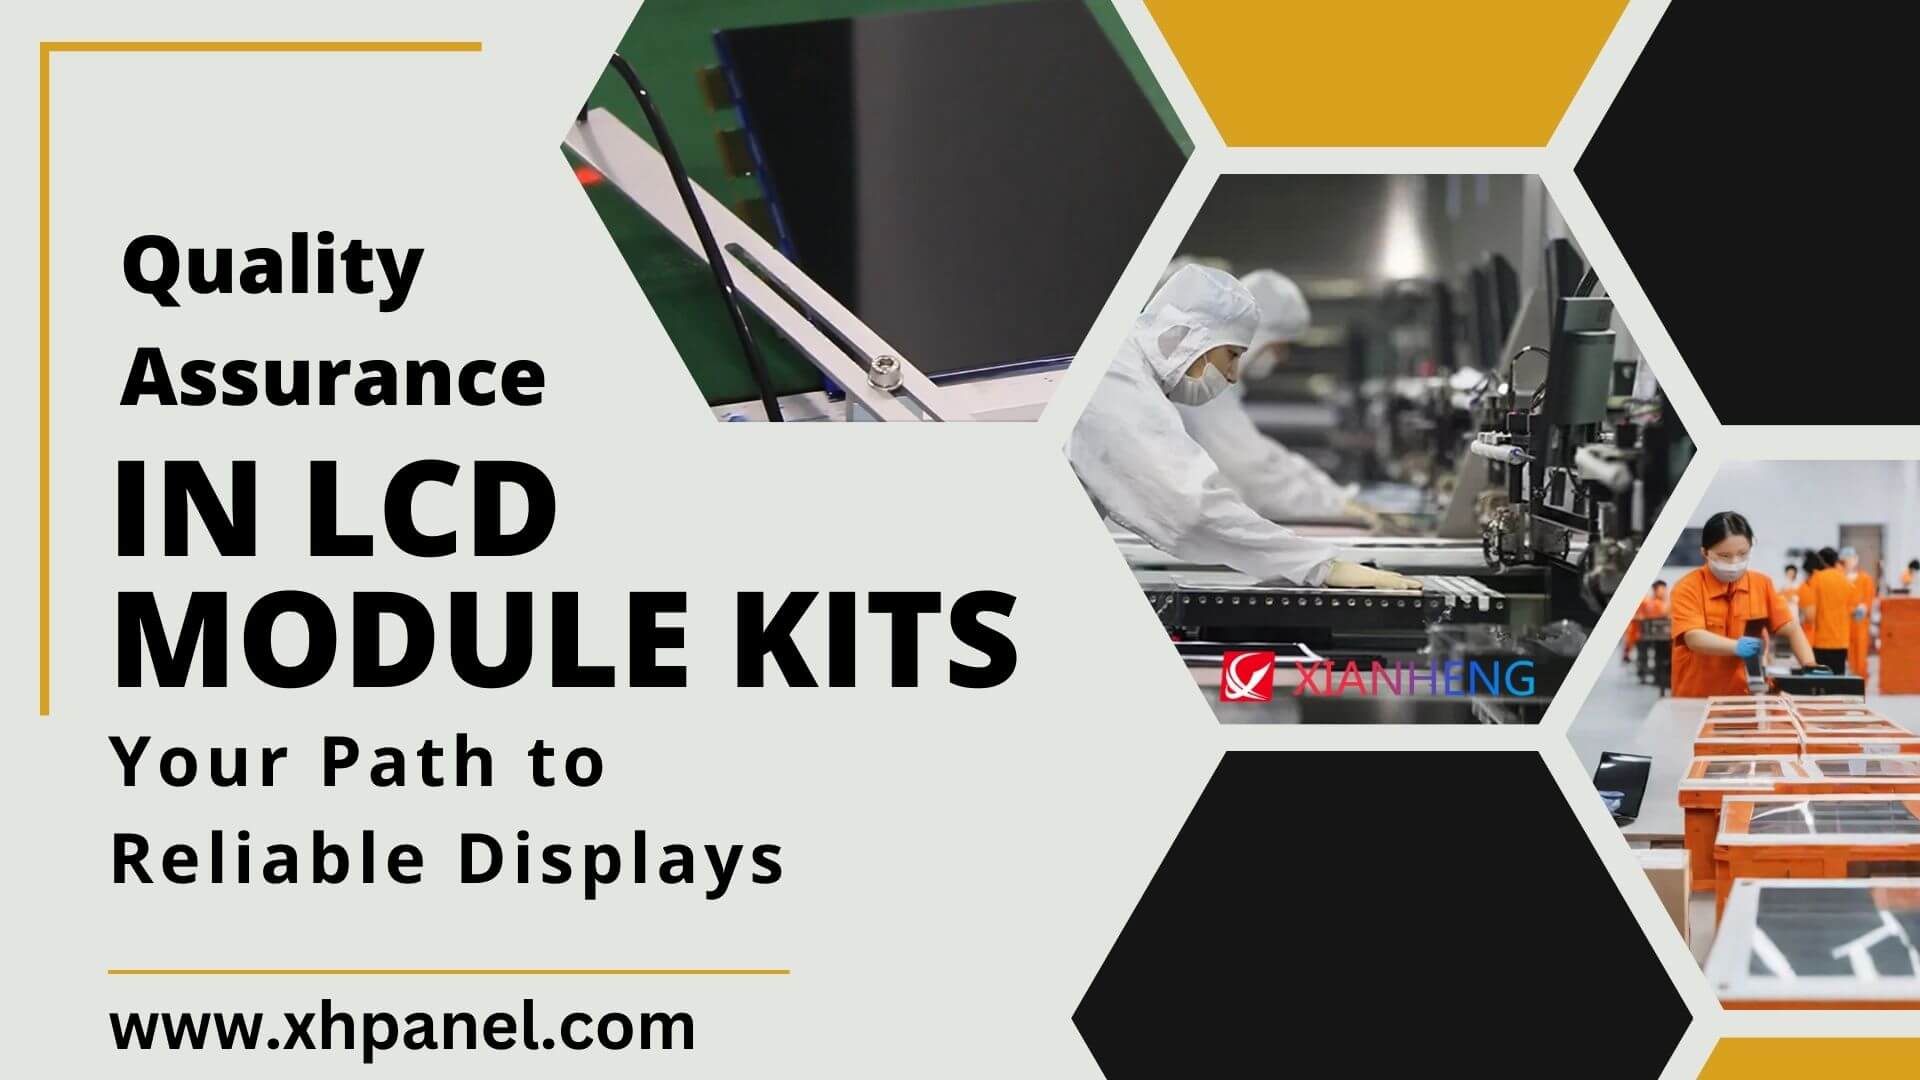 Quality Assurance in LCD Module Kits: Your Path to Reliable Displays